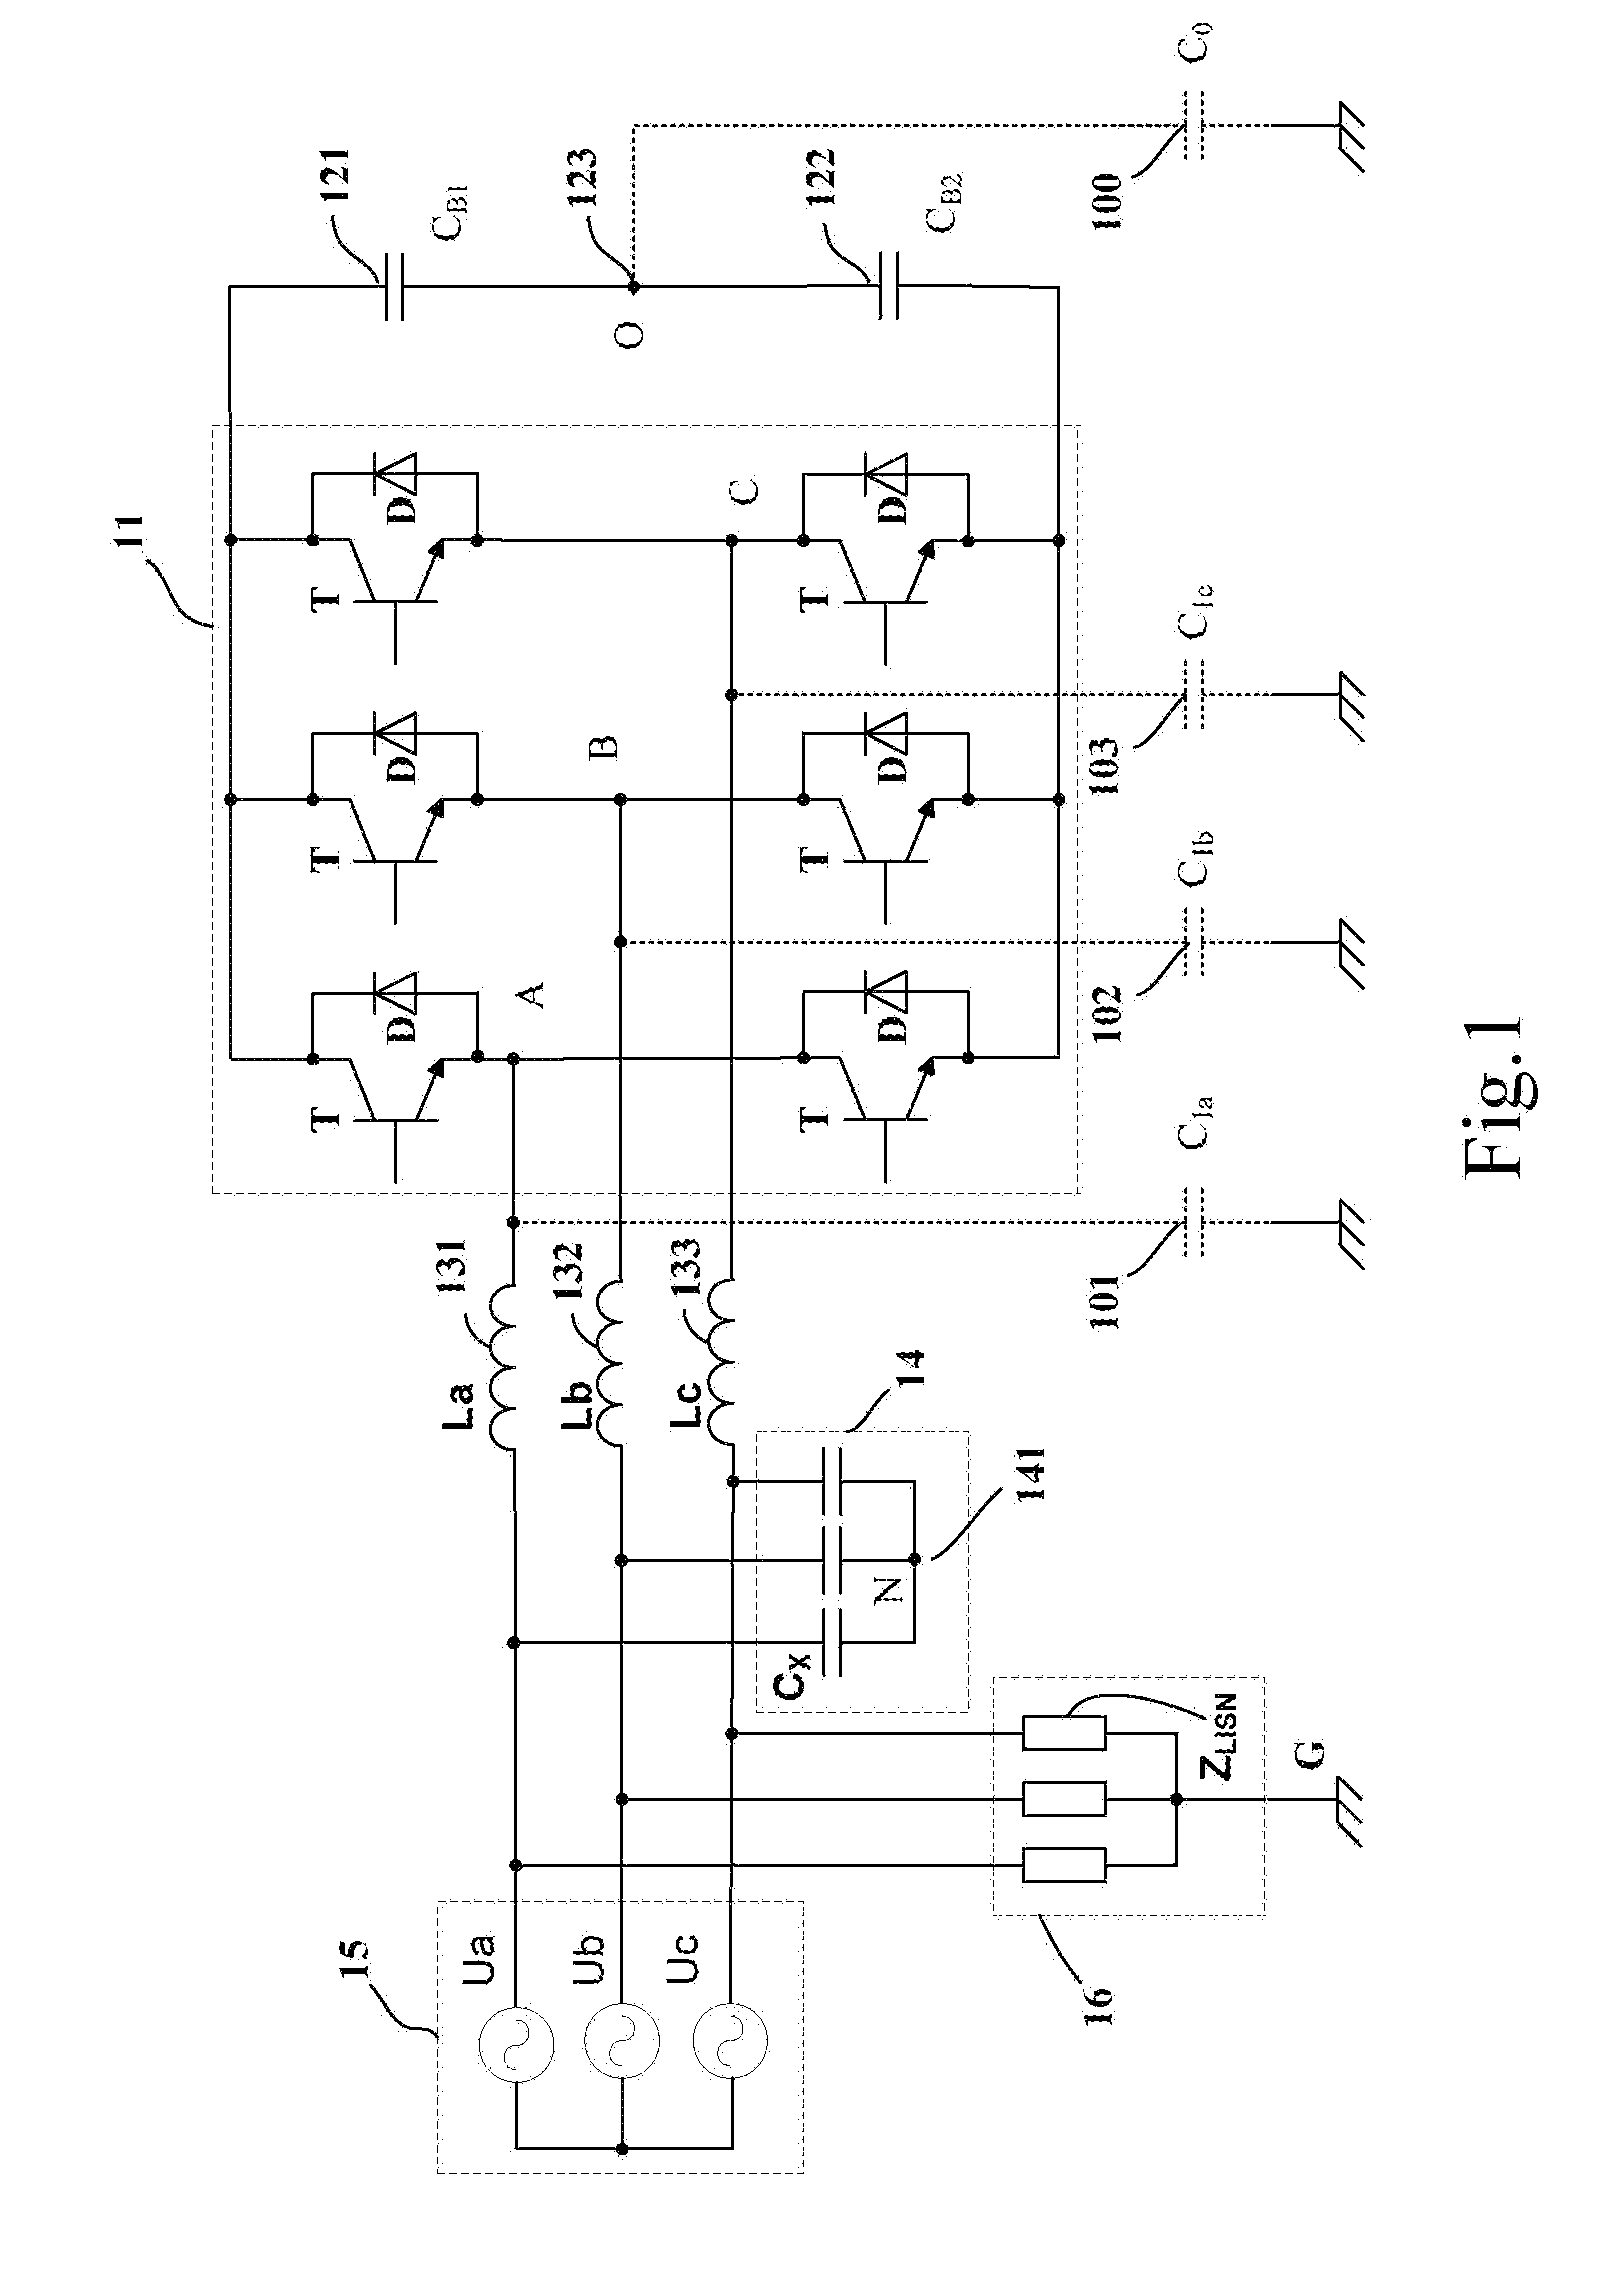 Power conversion apparatus with low common mode noise and application systems thereof